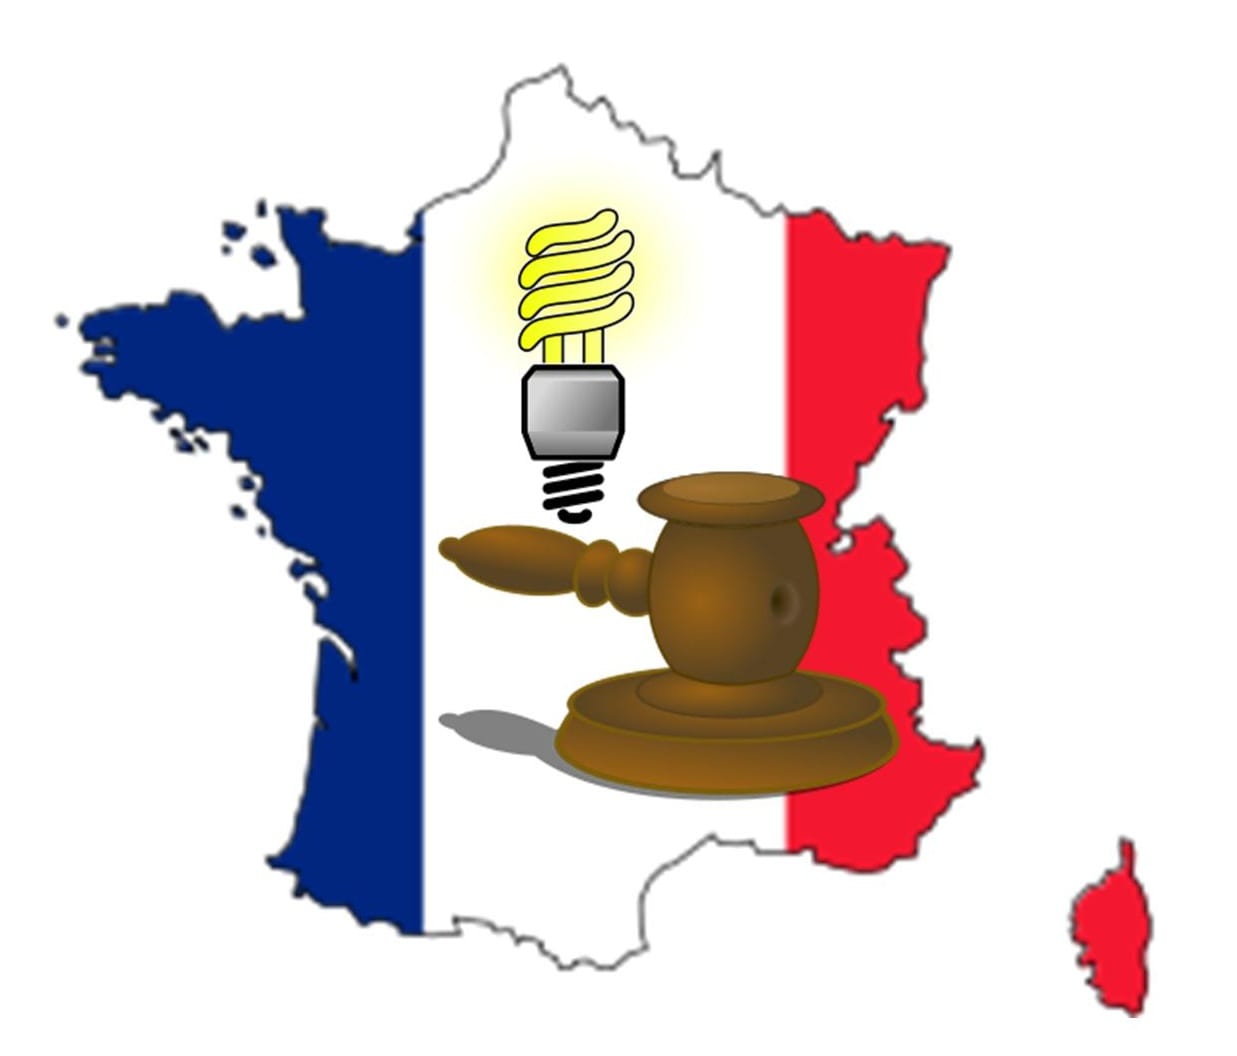 Energy efficiency law in France may serve as a powerful example for the rest of Europe